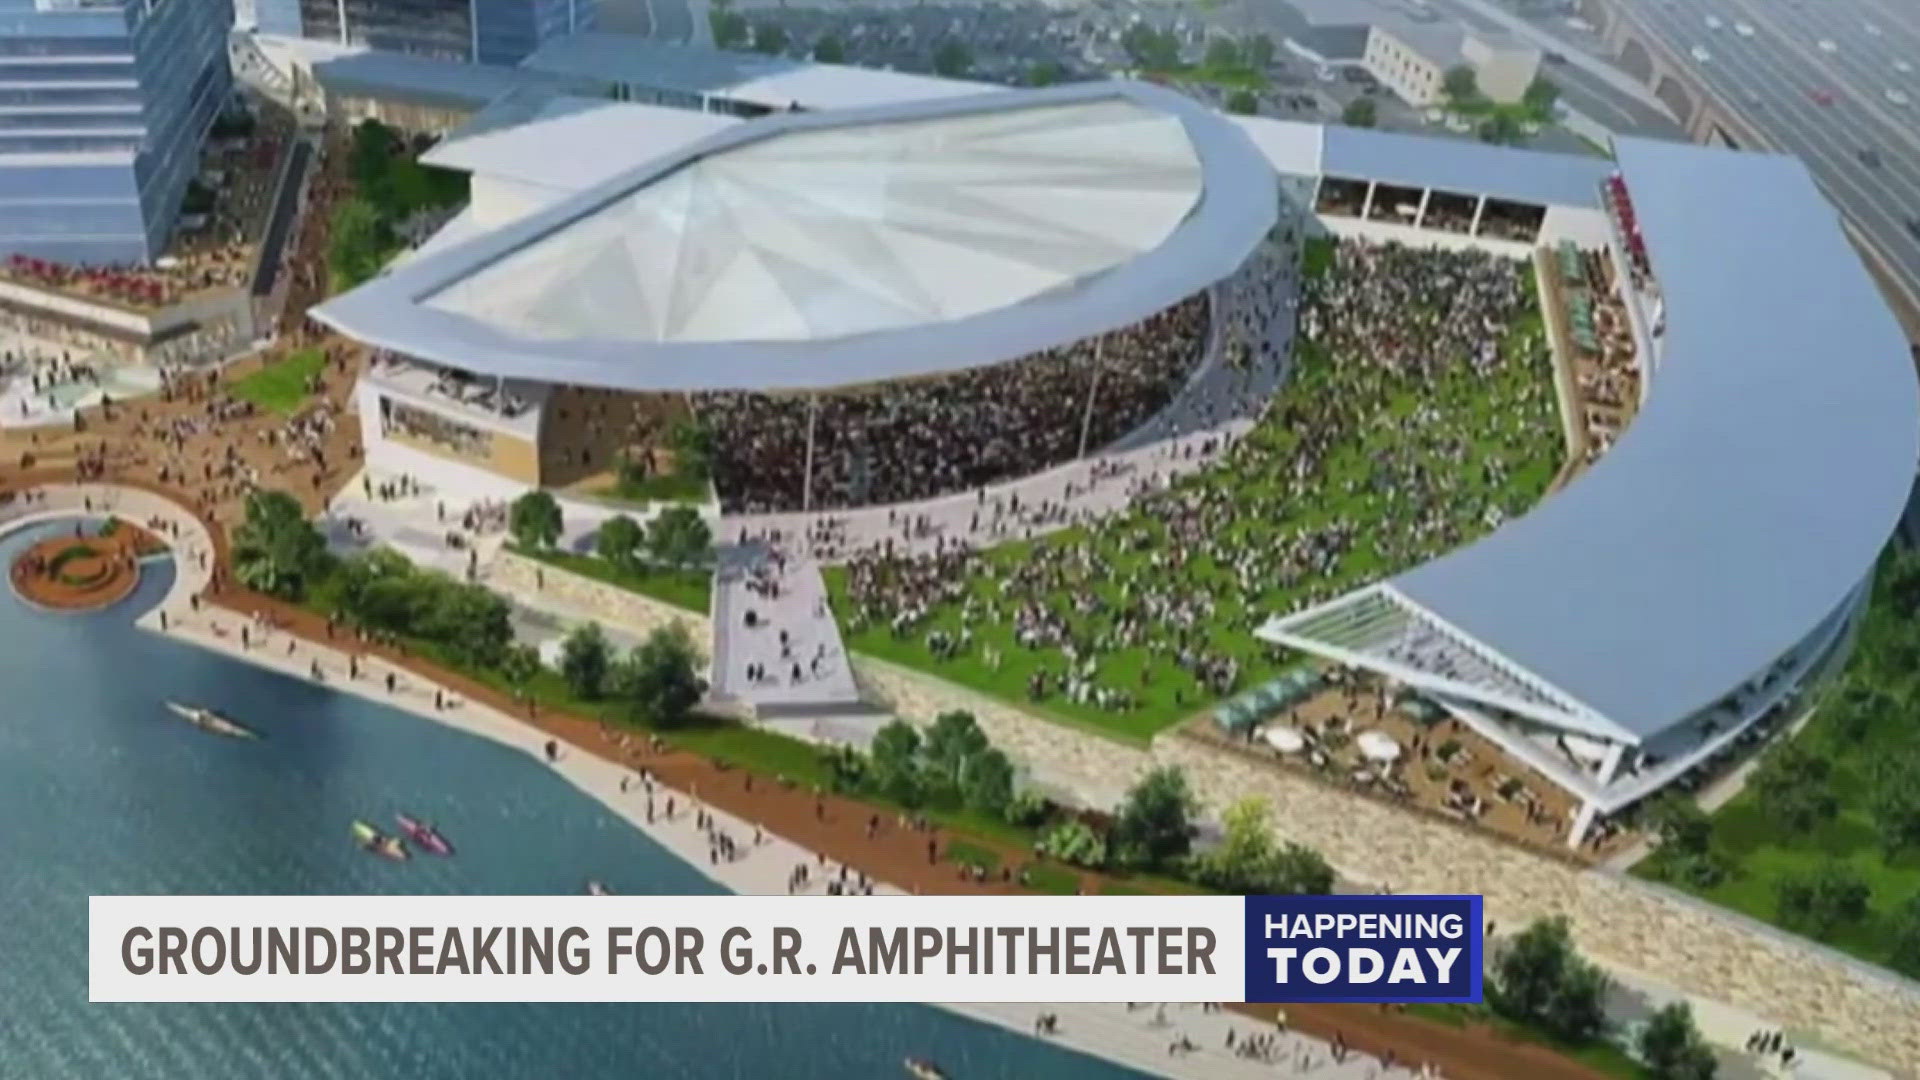 Demolition is expected to continue for several months before construction begins. The amphitheater is slated to open in 2026.